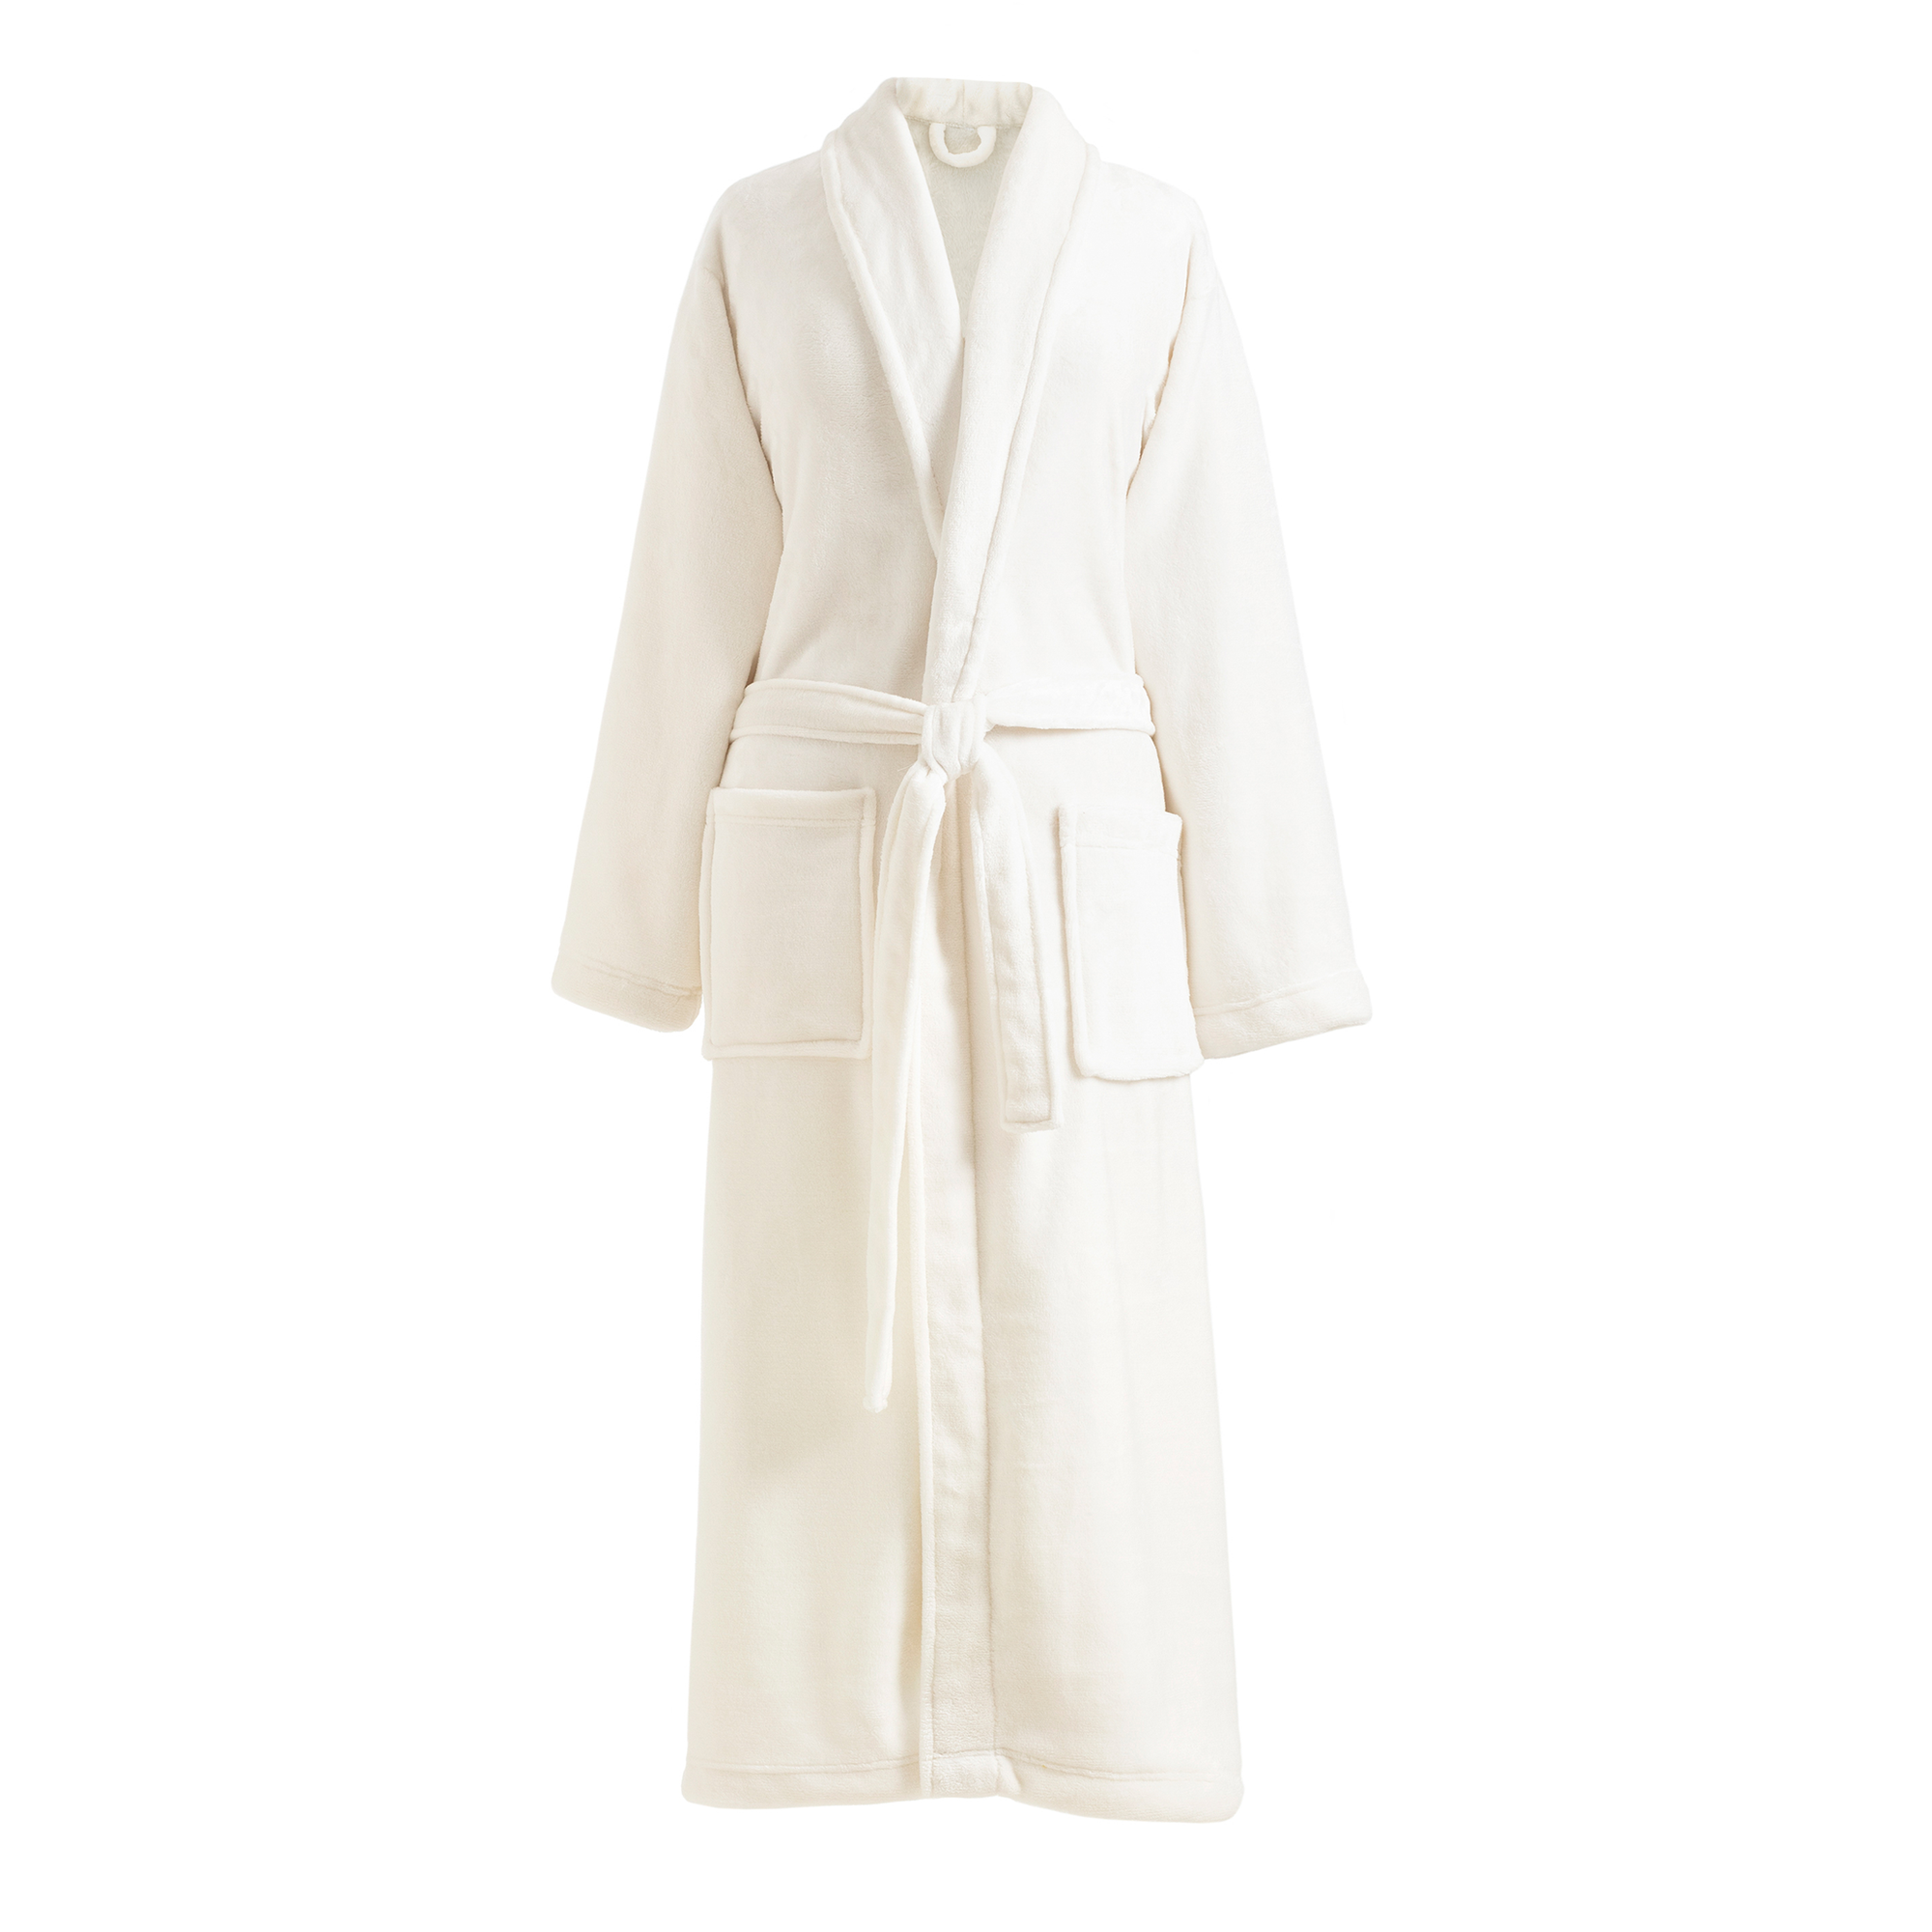 Whole Image of Pine Cone Hill Sheepy Fleece 2.0 Robe in Ivory Color